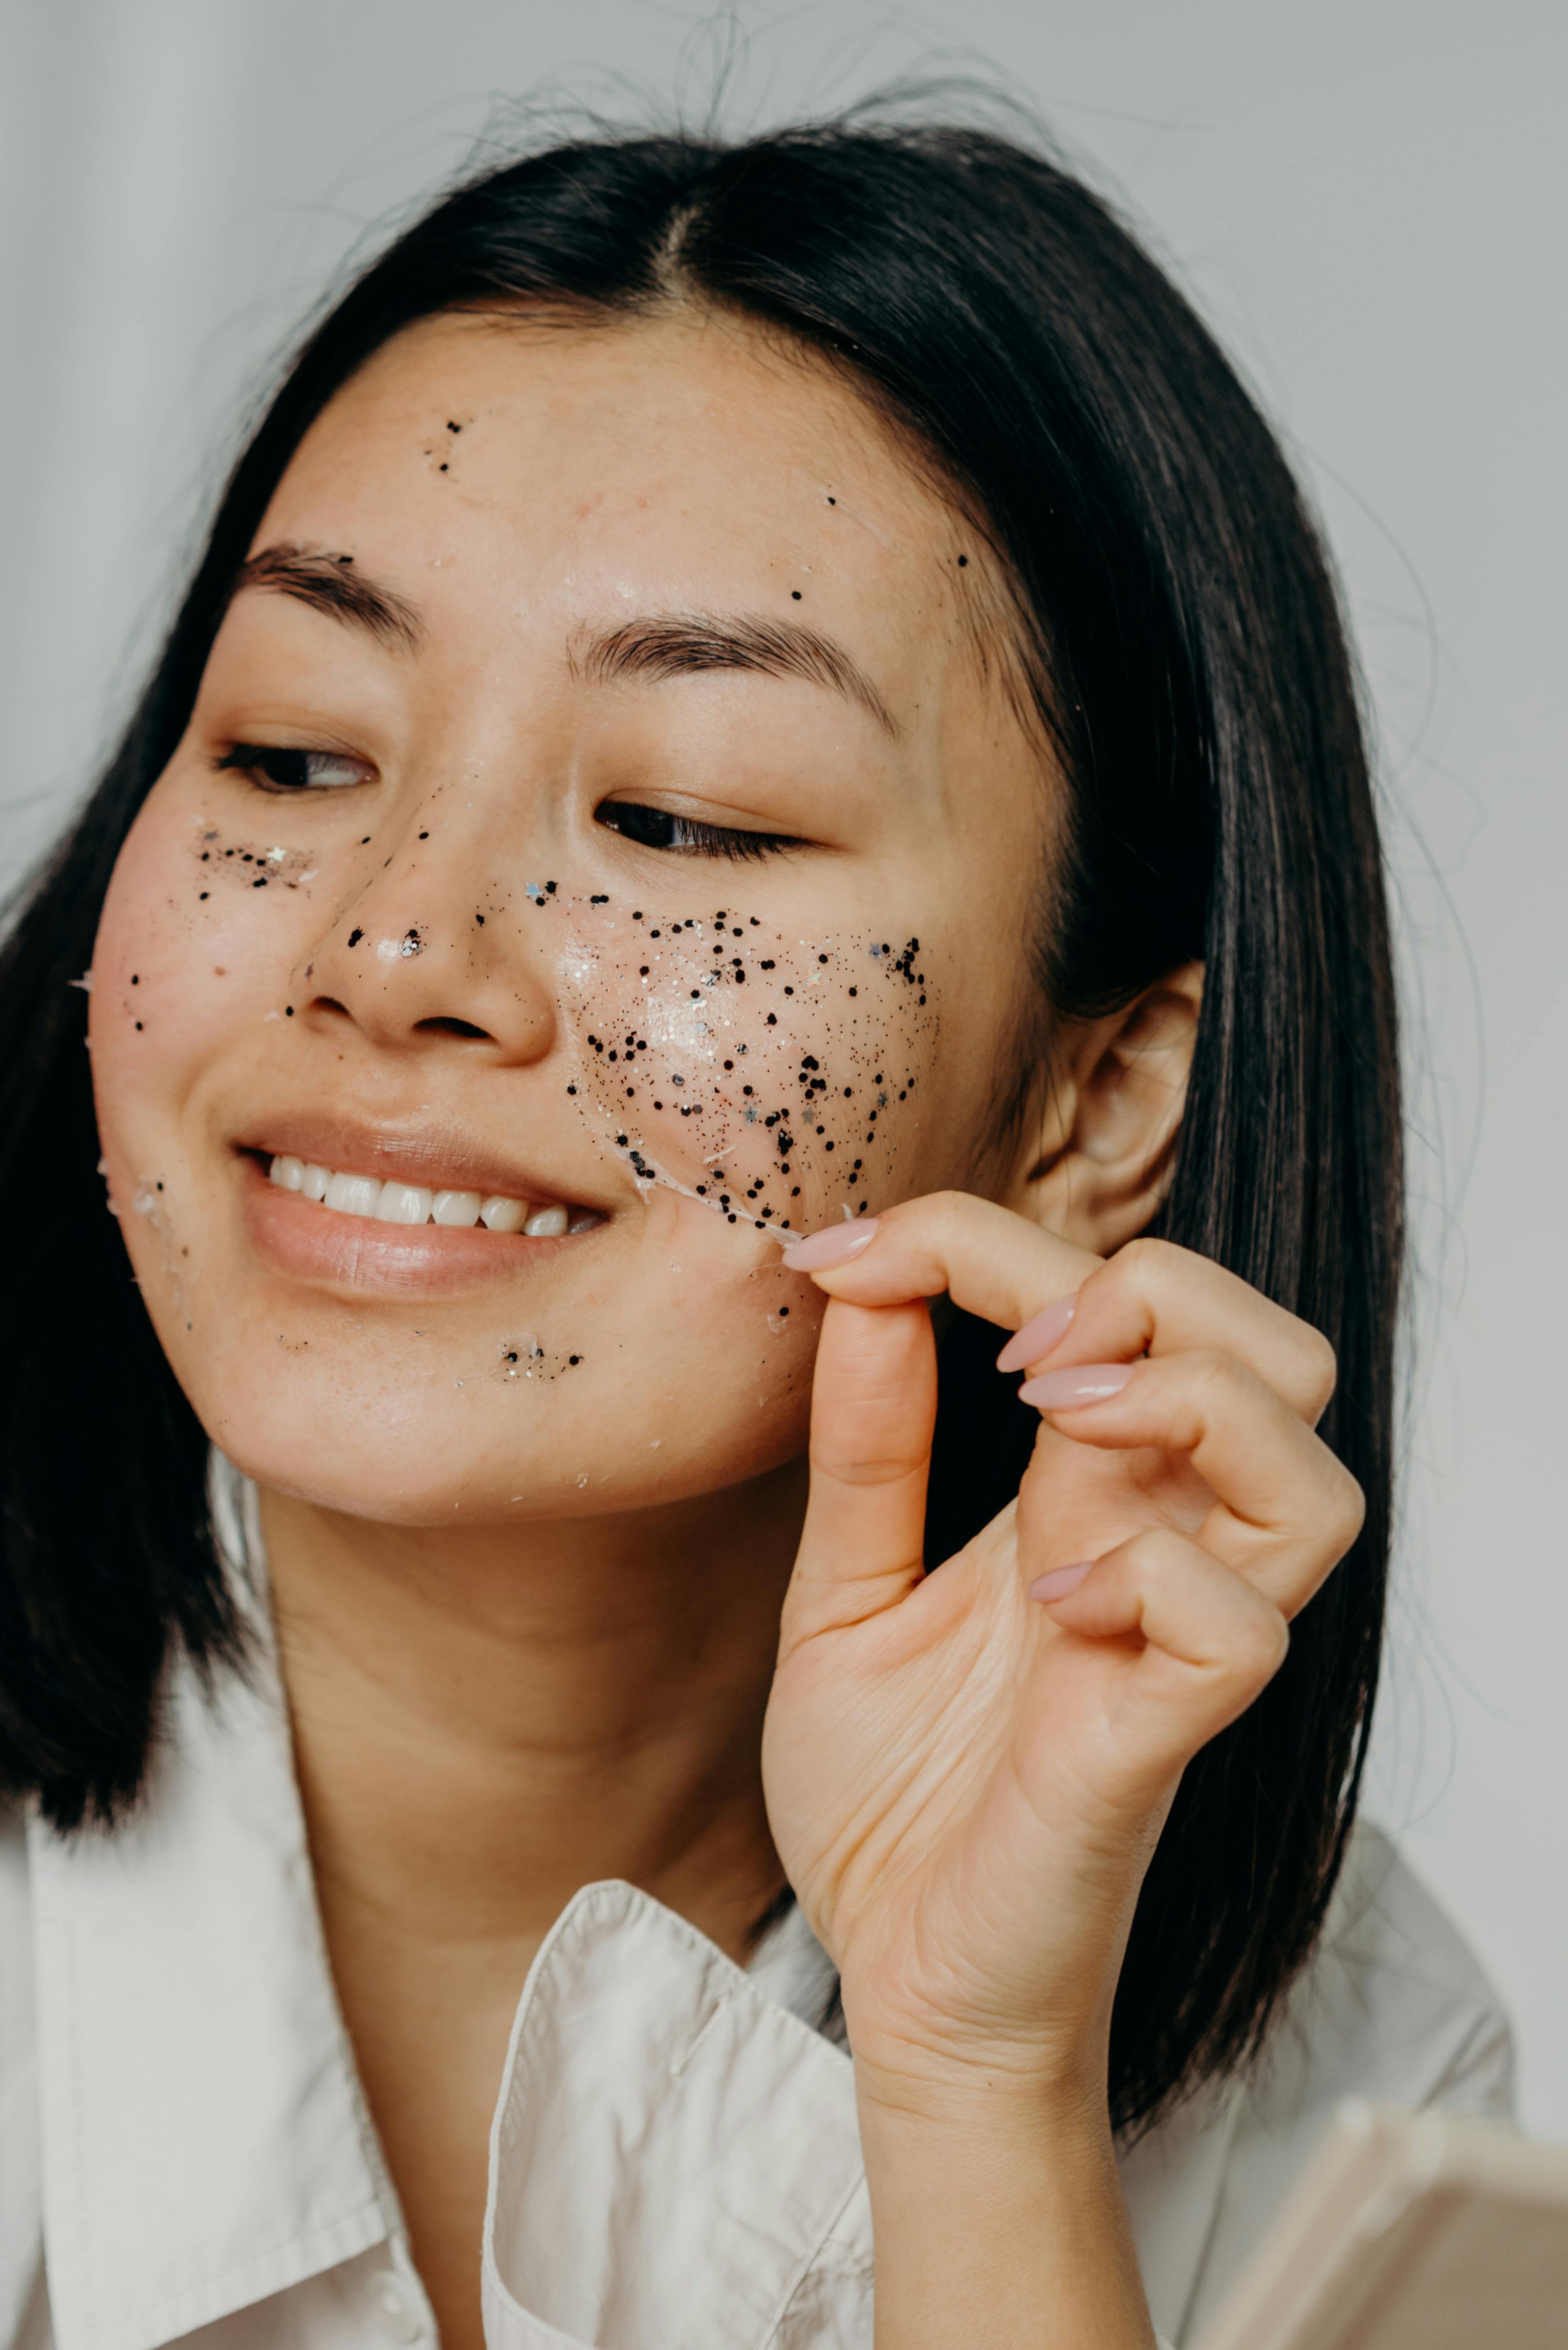 A Smiling Woman Peeling a Glitter Mask on Her Face · Free Stock Photo